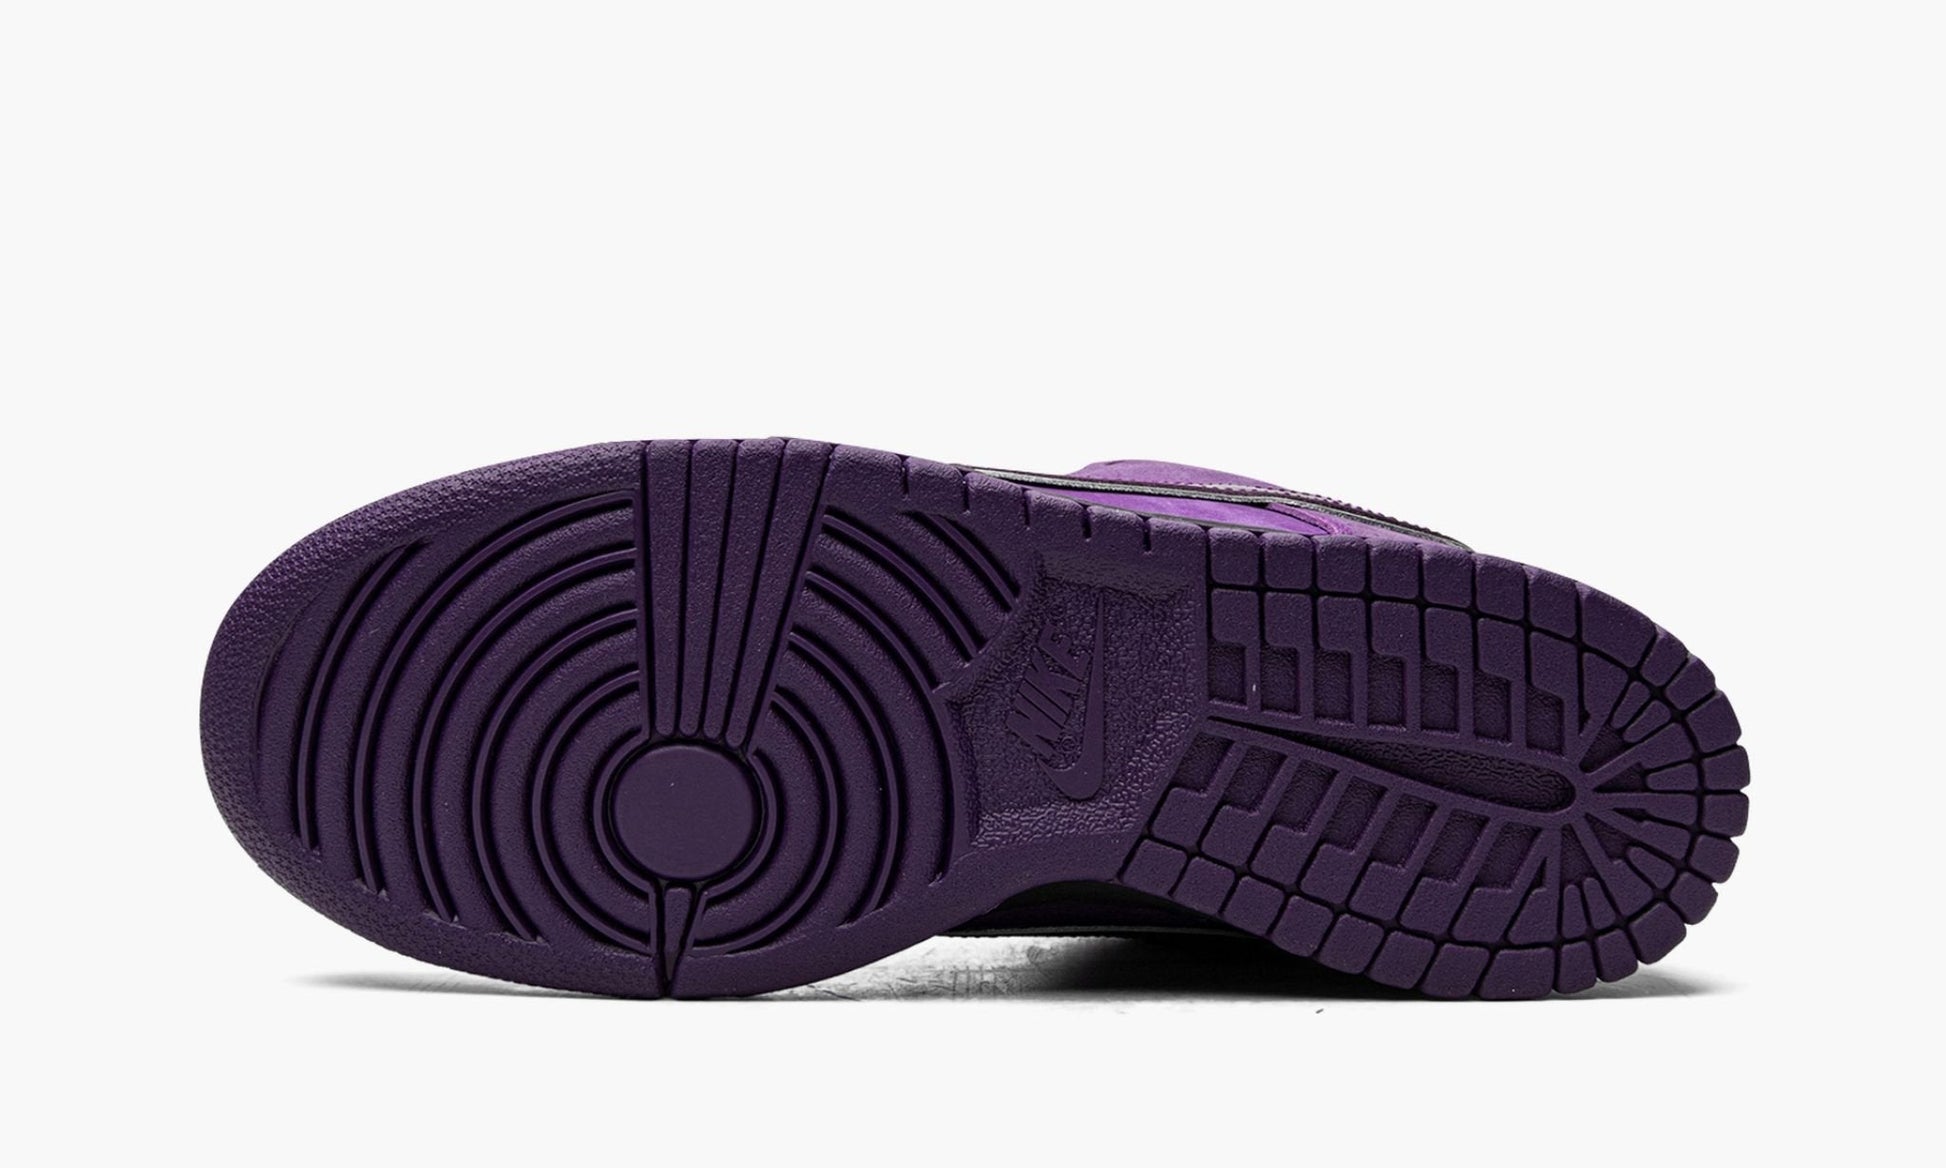 Nike SB Dunk Low Pro OG QS "Concepts - Purple Lobster Special Box"